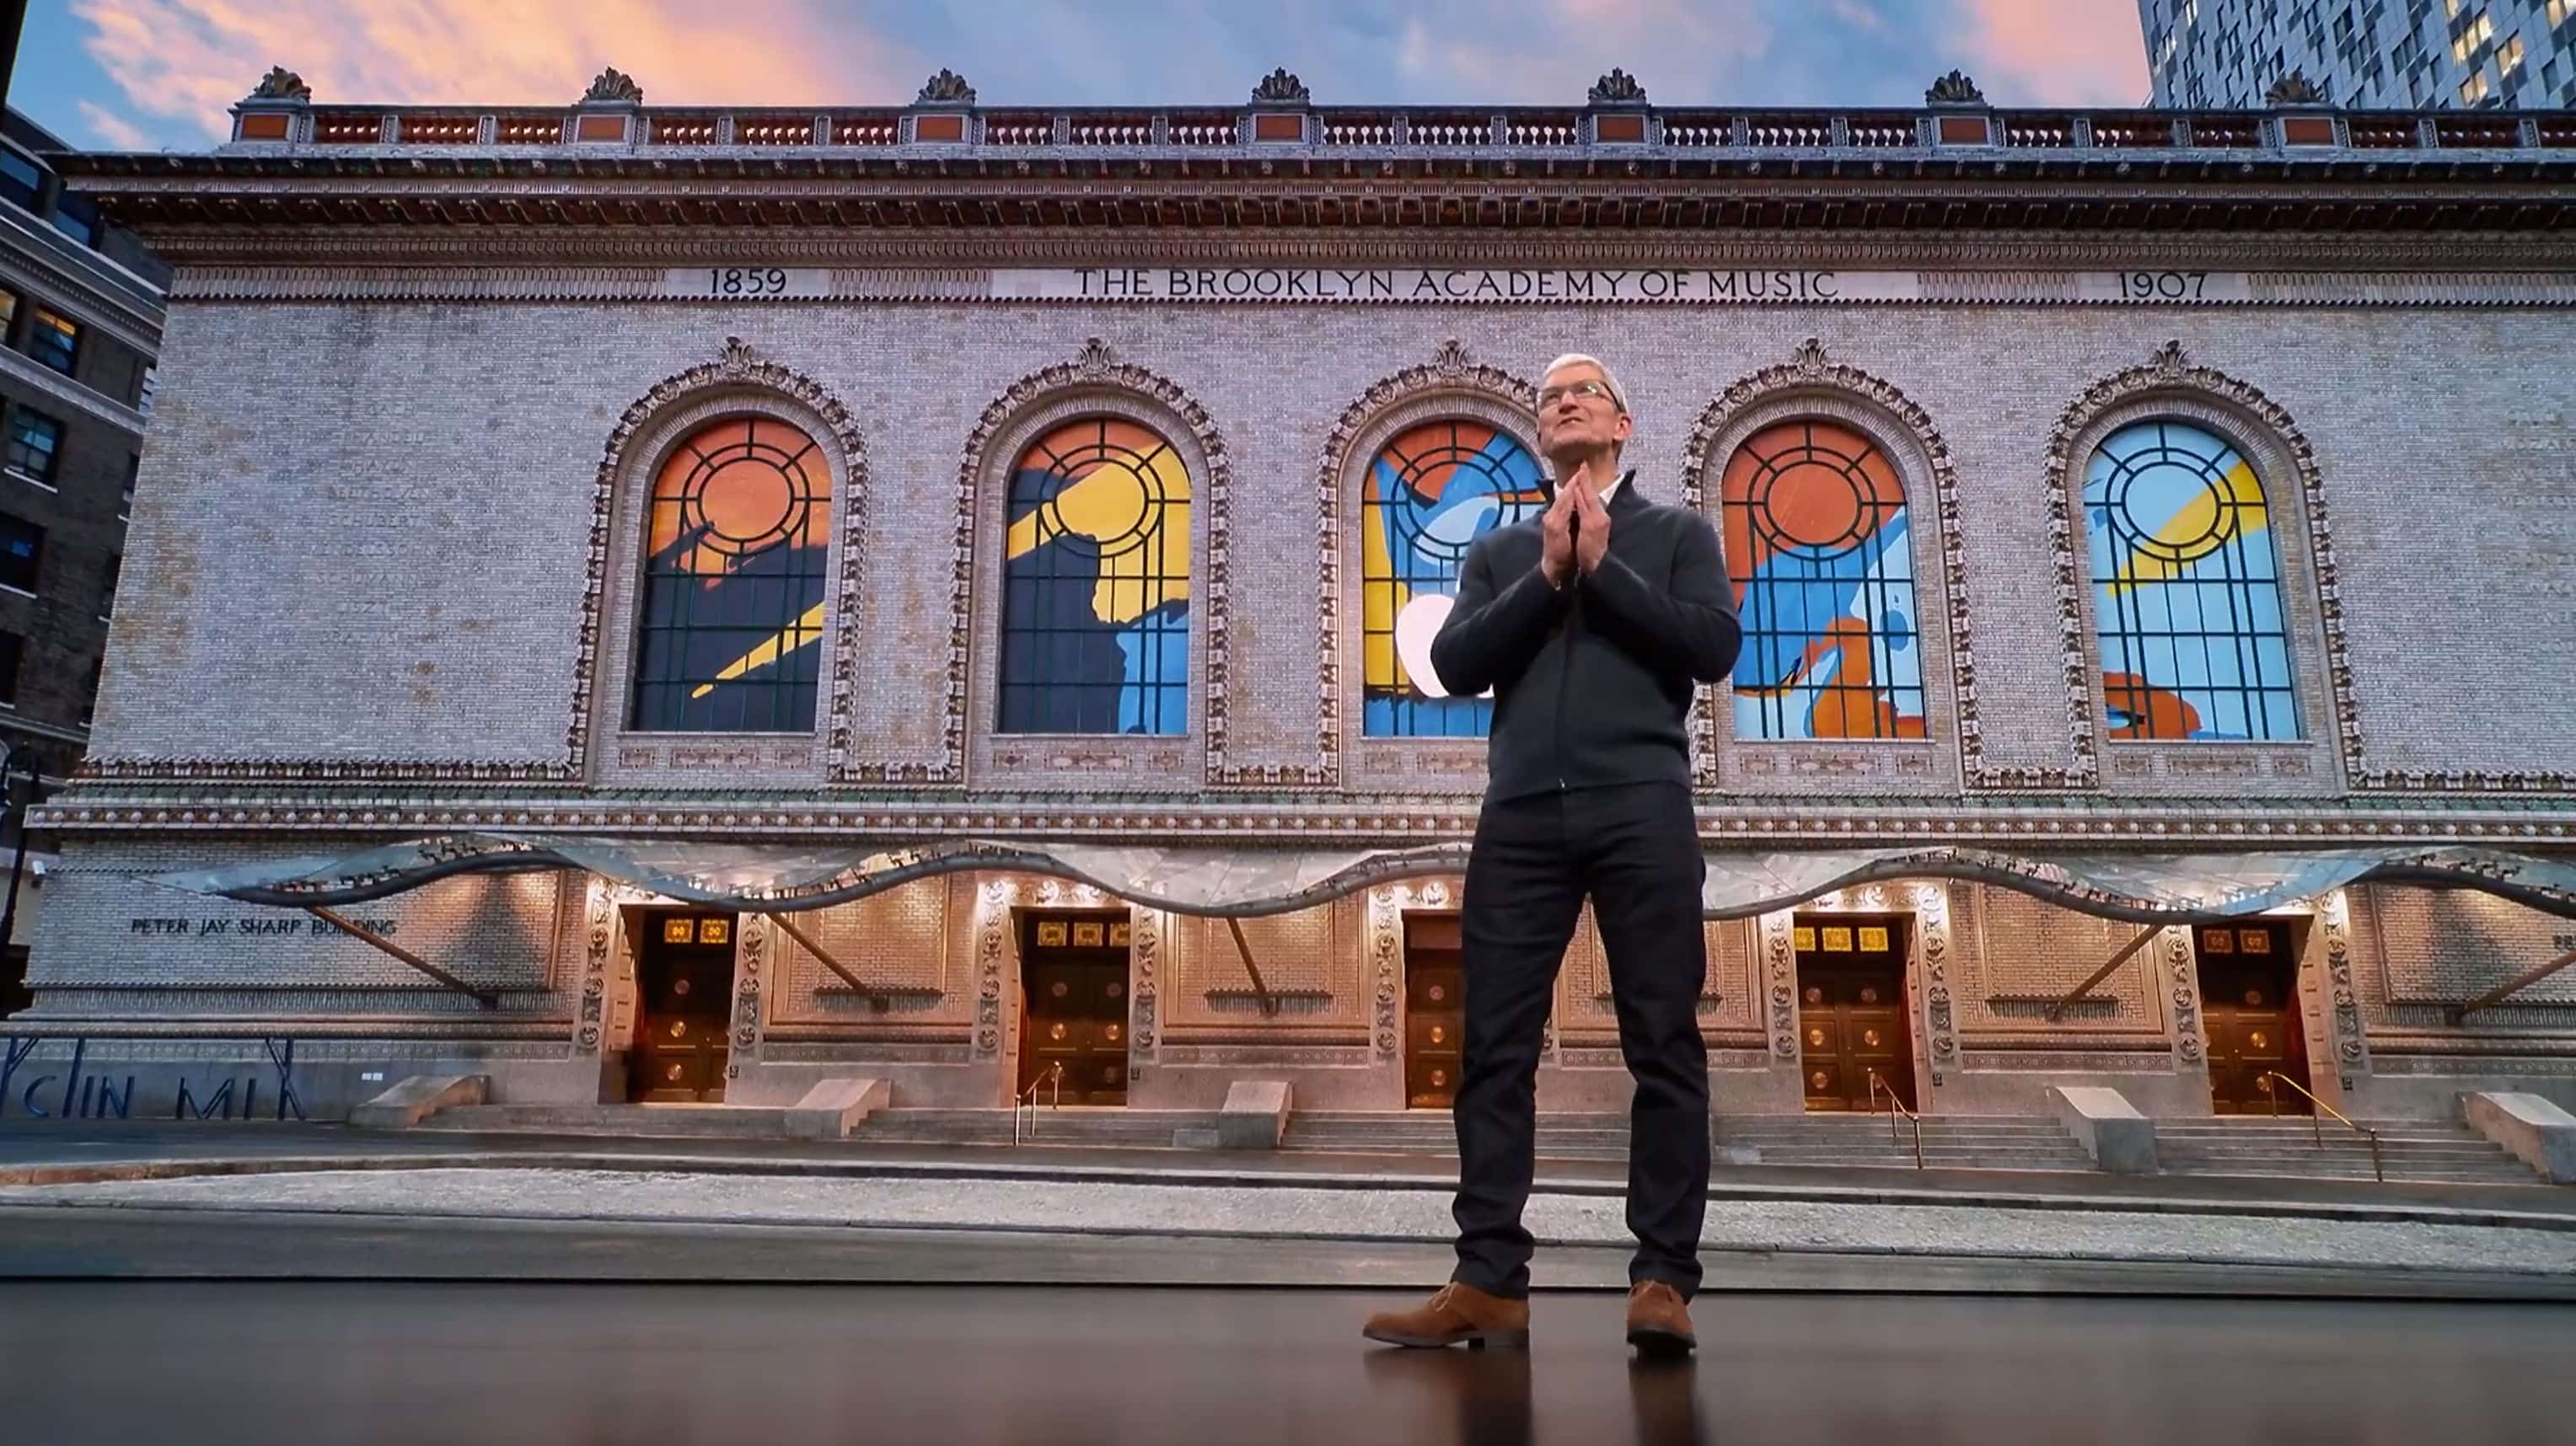 Tim Cook and Co. bring the hardware heat at The Brooklyn Academy of Music during the 